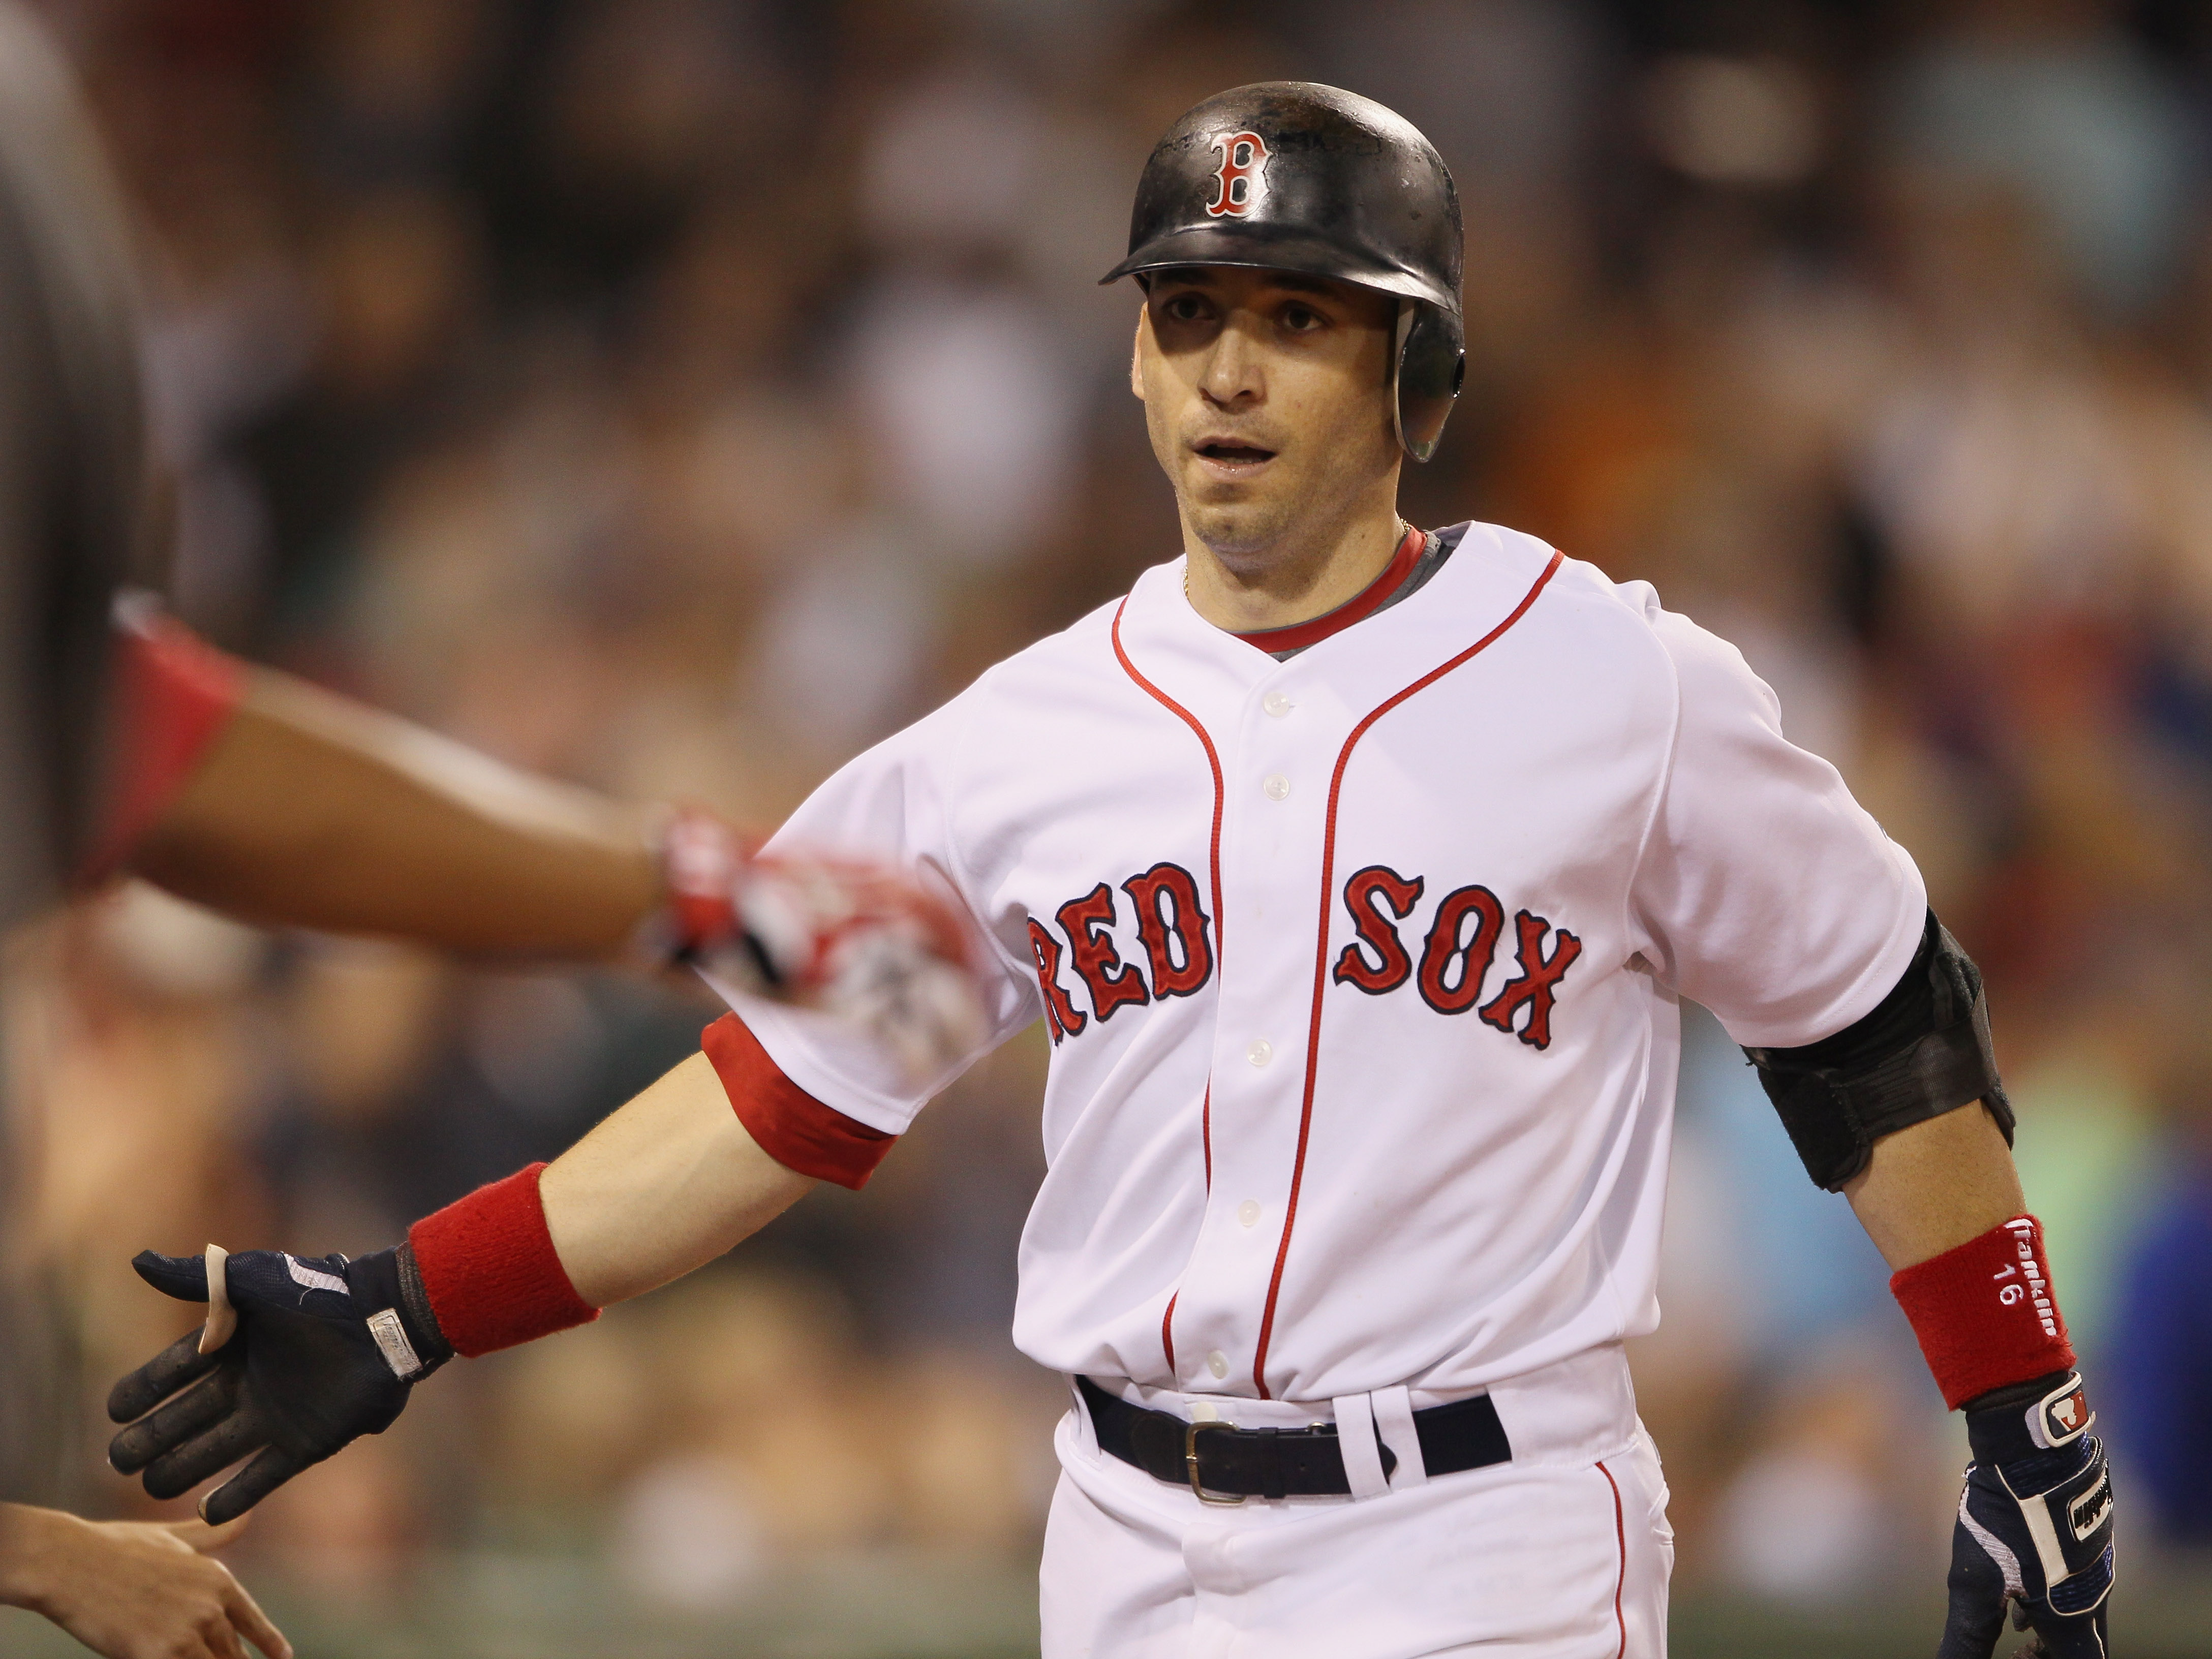 BOSTON - SEPTEMBER 08:  Marco Scutaro #16 of the Boston Red Sox is congratulated after he hit a two run homer against the Tampa Bay Rays on September 8, 2010 at Fenway Park in Boston, Massachusetts.  (Photo by Elsa/Getty Images)